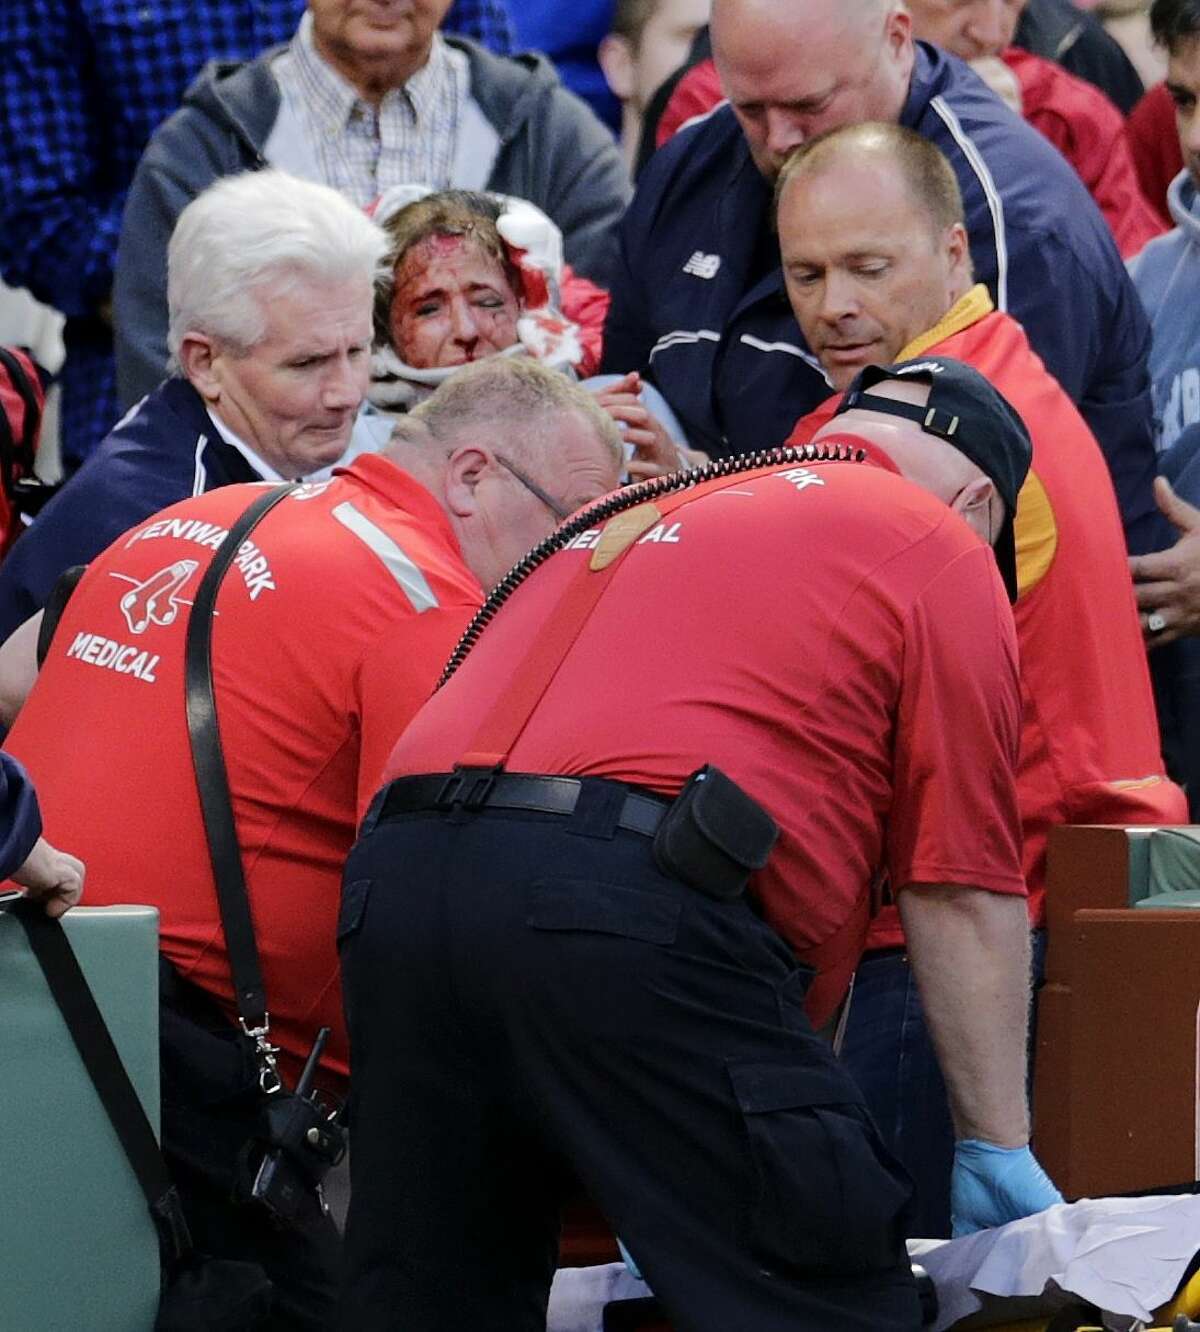 A fan, who was hit in the head with a broken bat by the Oakland Athletics’ Brett Lawrie, is helped from the stands during Friday night’s game at Fenway Park in Boston.